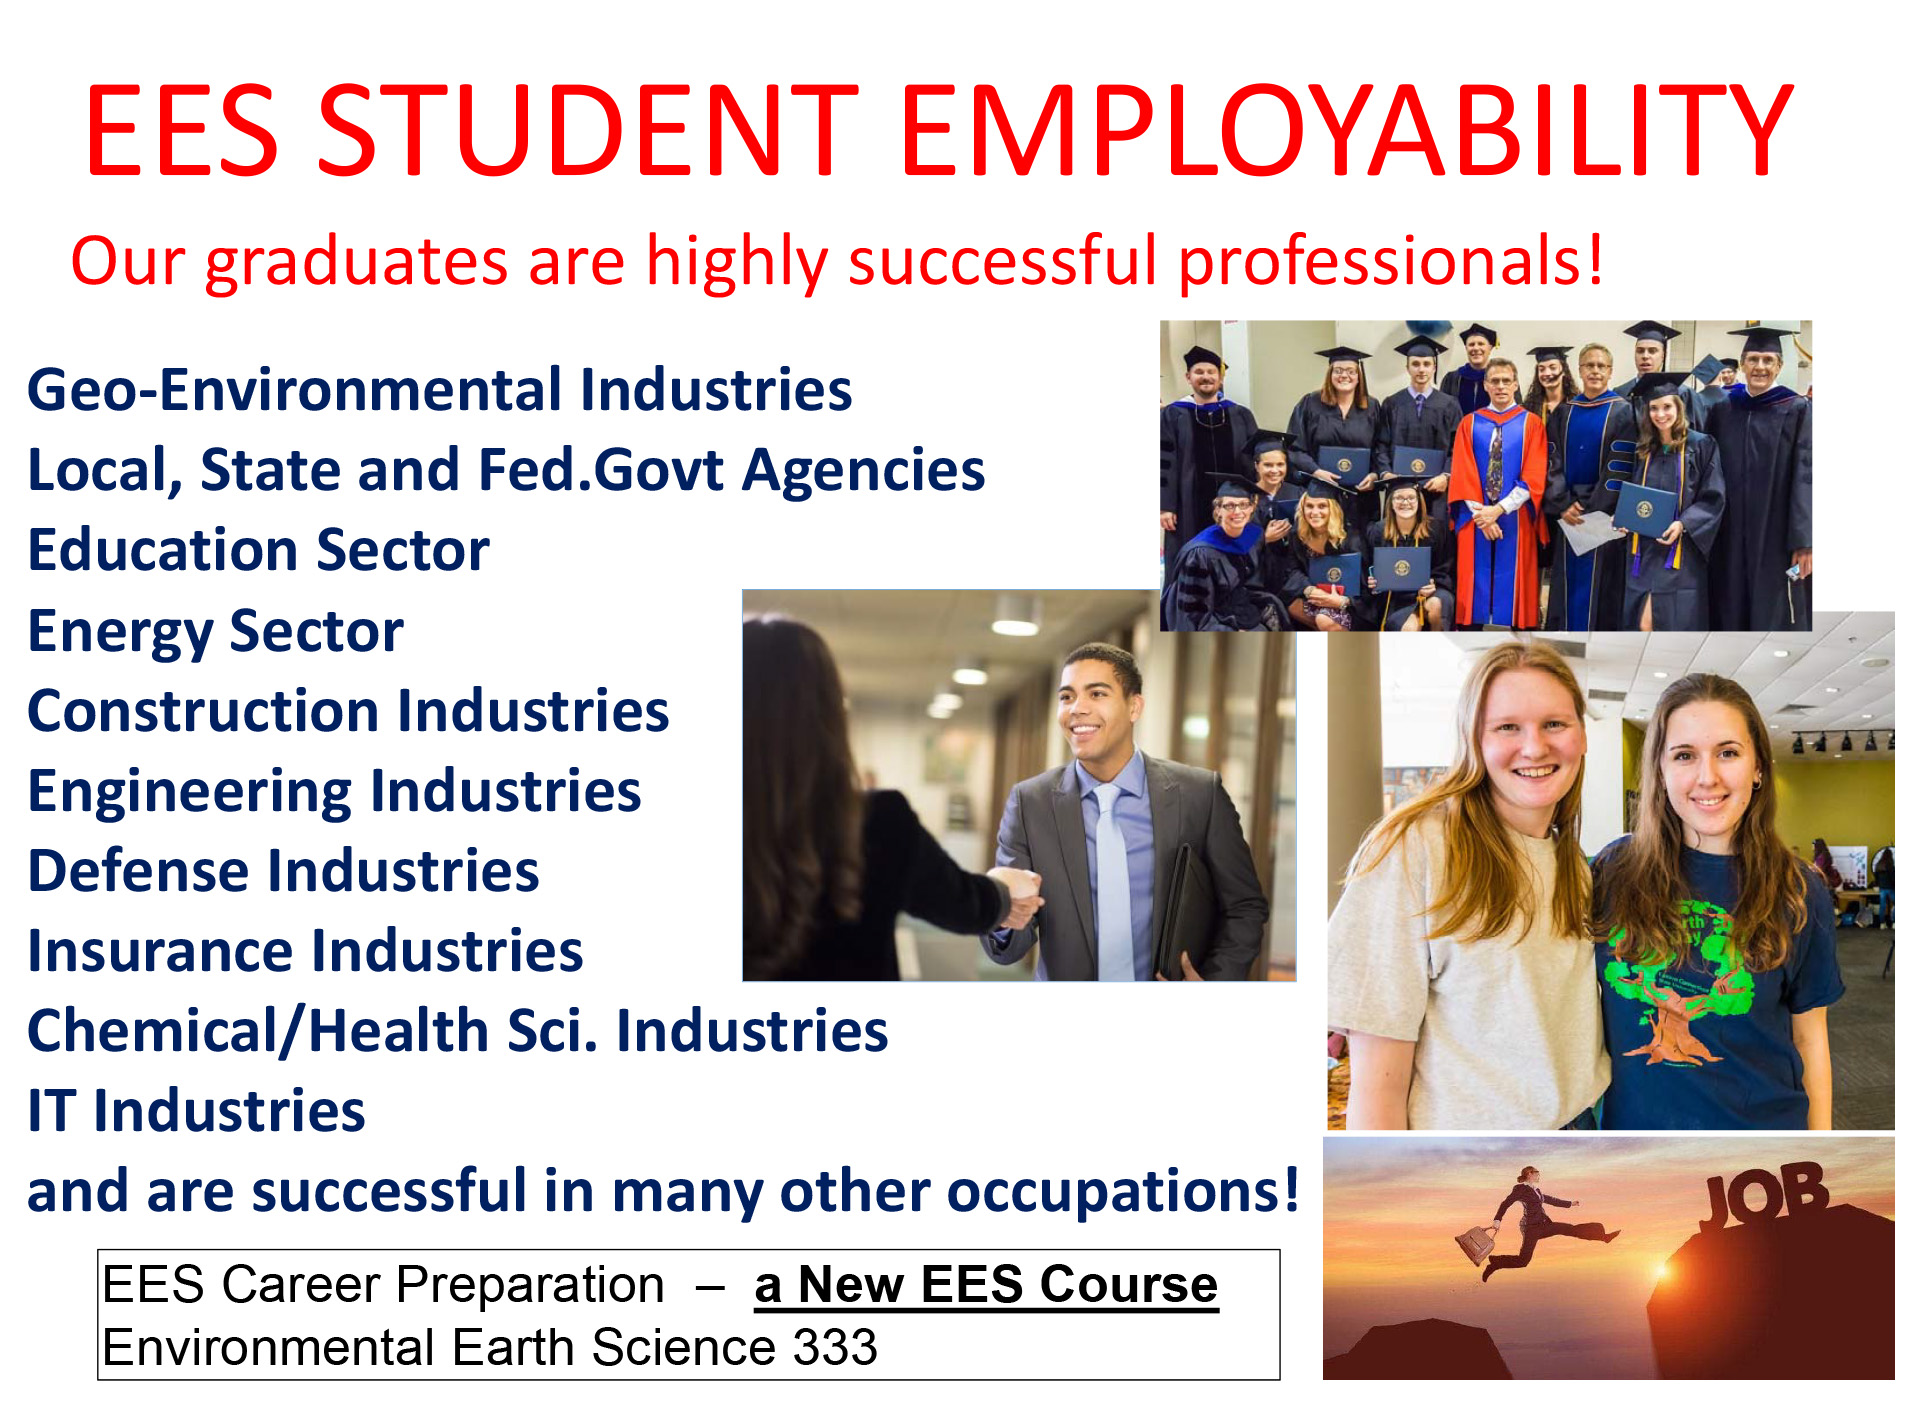 EES STUDENT EMPLOYABILITY - Our graduates are highly successful professionals!